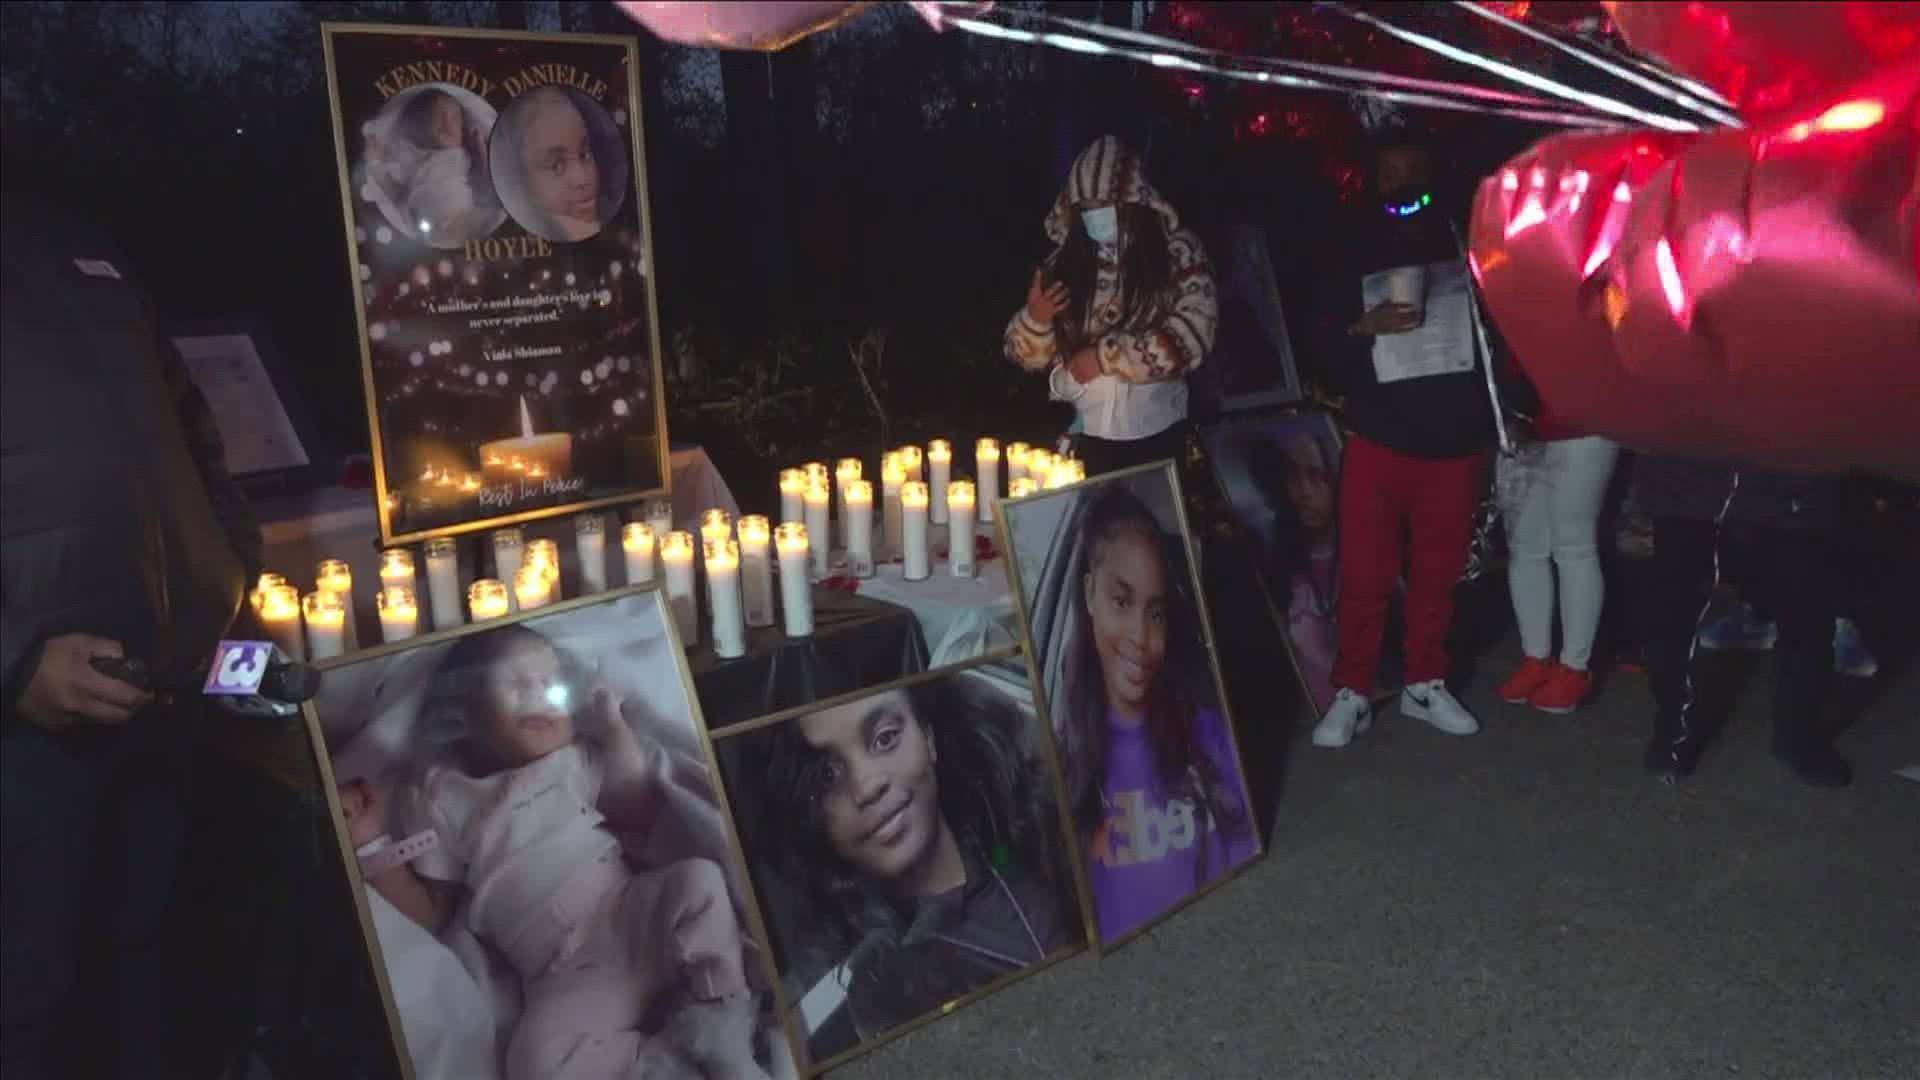 Community members and loved ones of Danielle and Kennedy Hoyle held a candlelight vigil for the mother and newborn daughter Saturday.